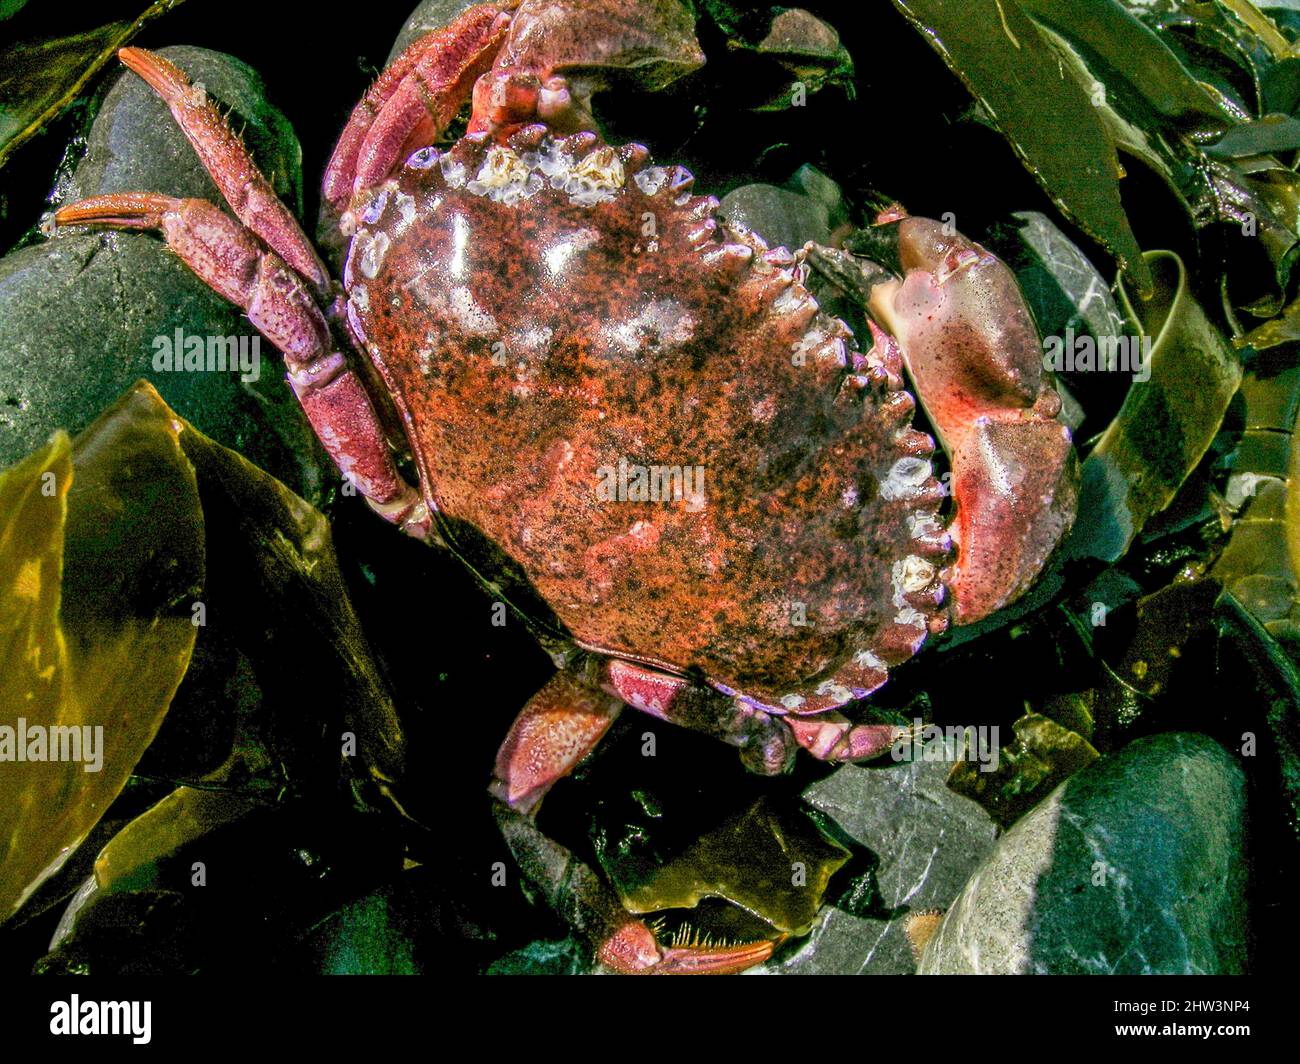 Cancer productus, one of several species known as red rock crabs